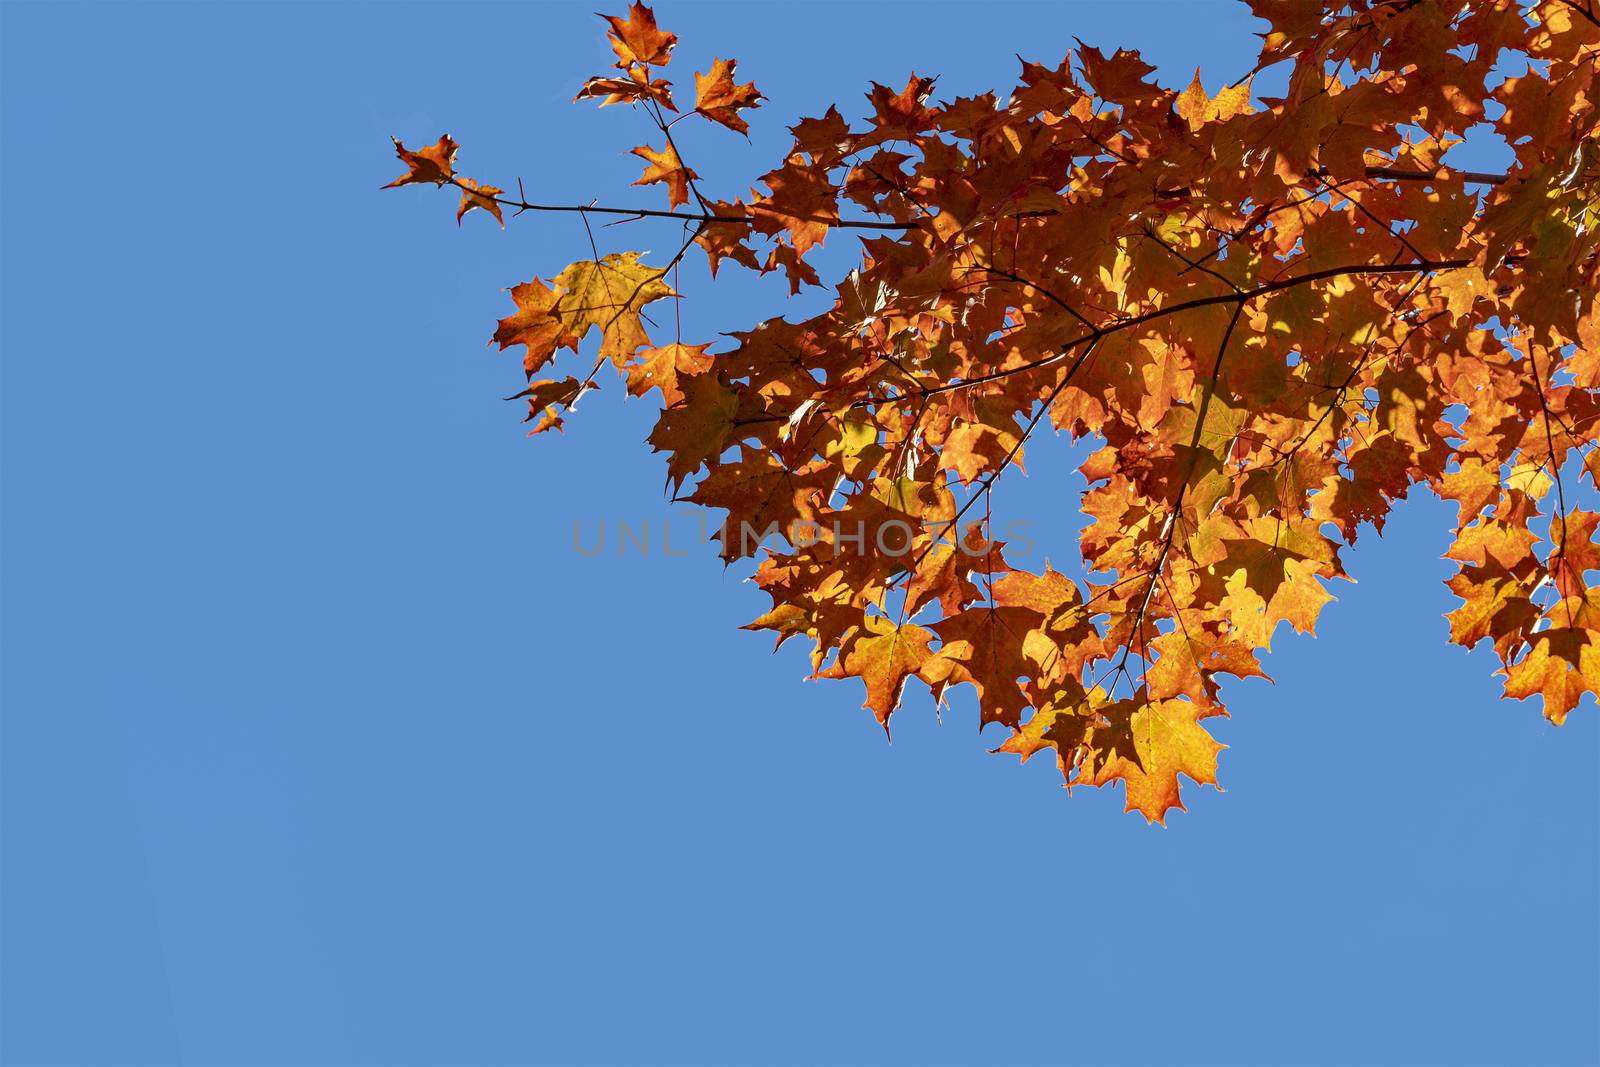 Autumn maple leaves on blue sky background by ben44